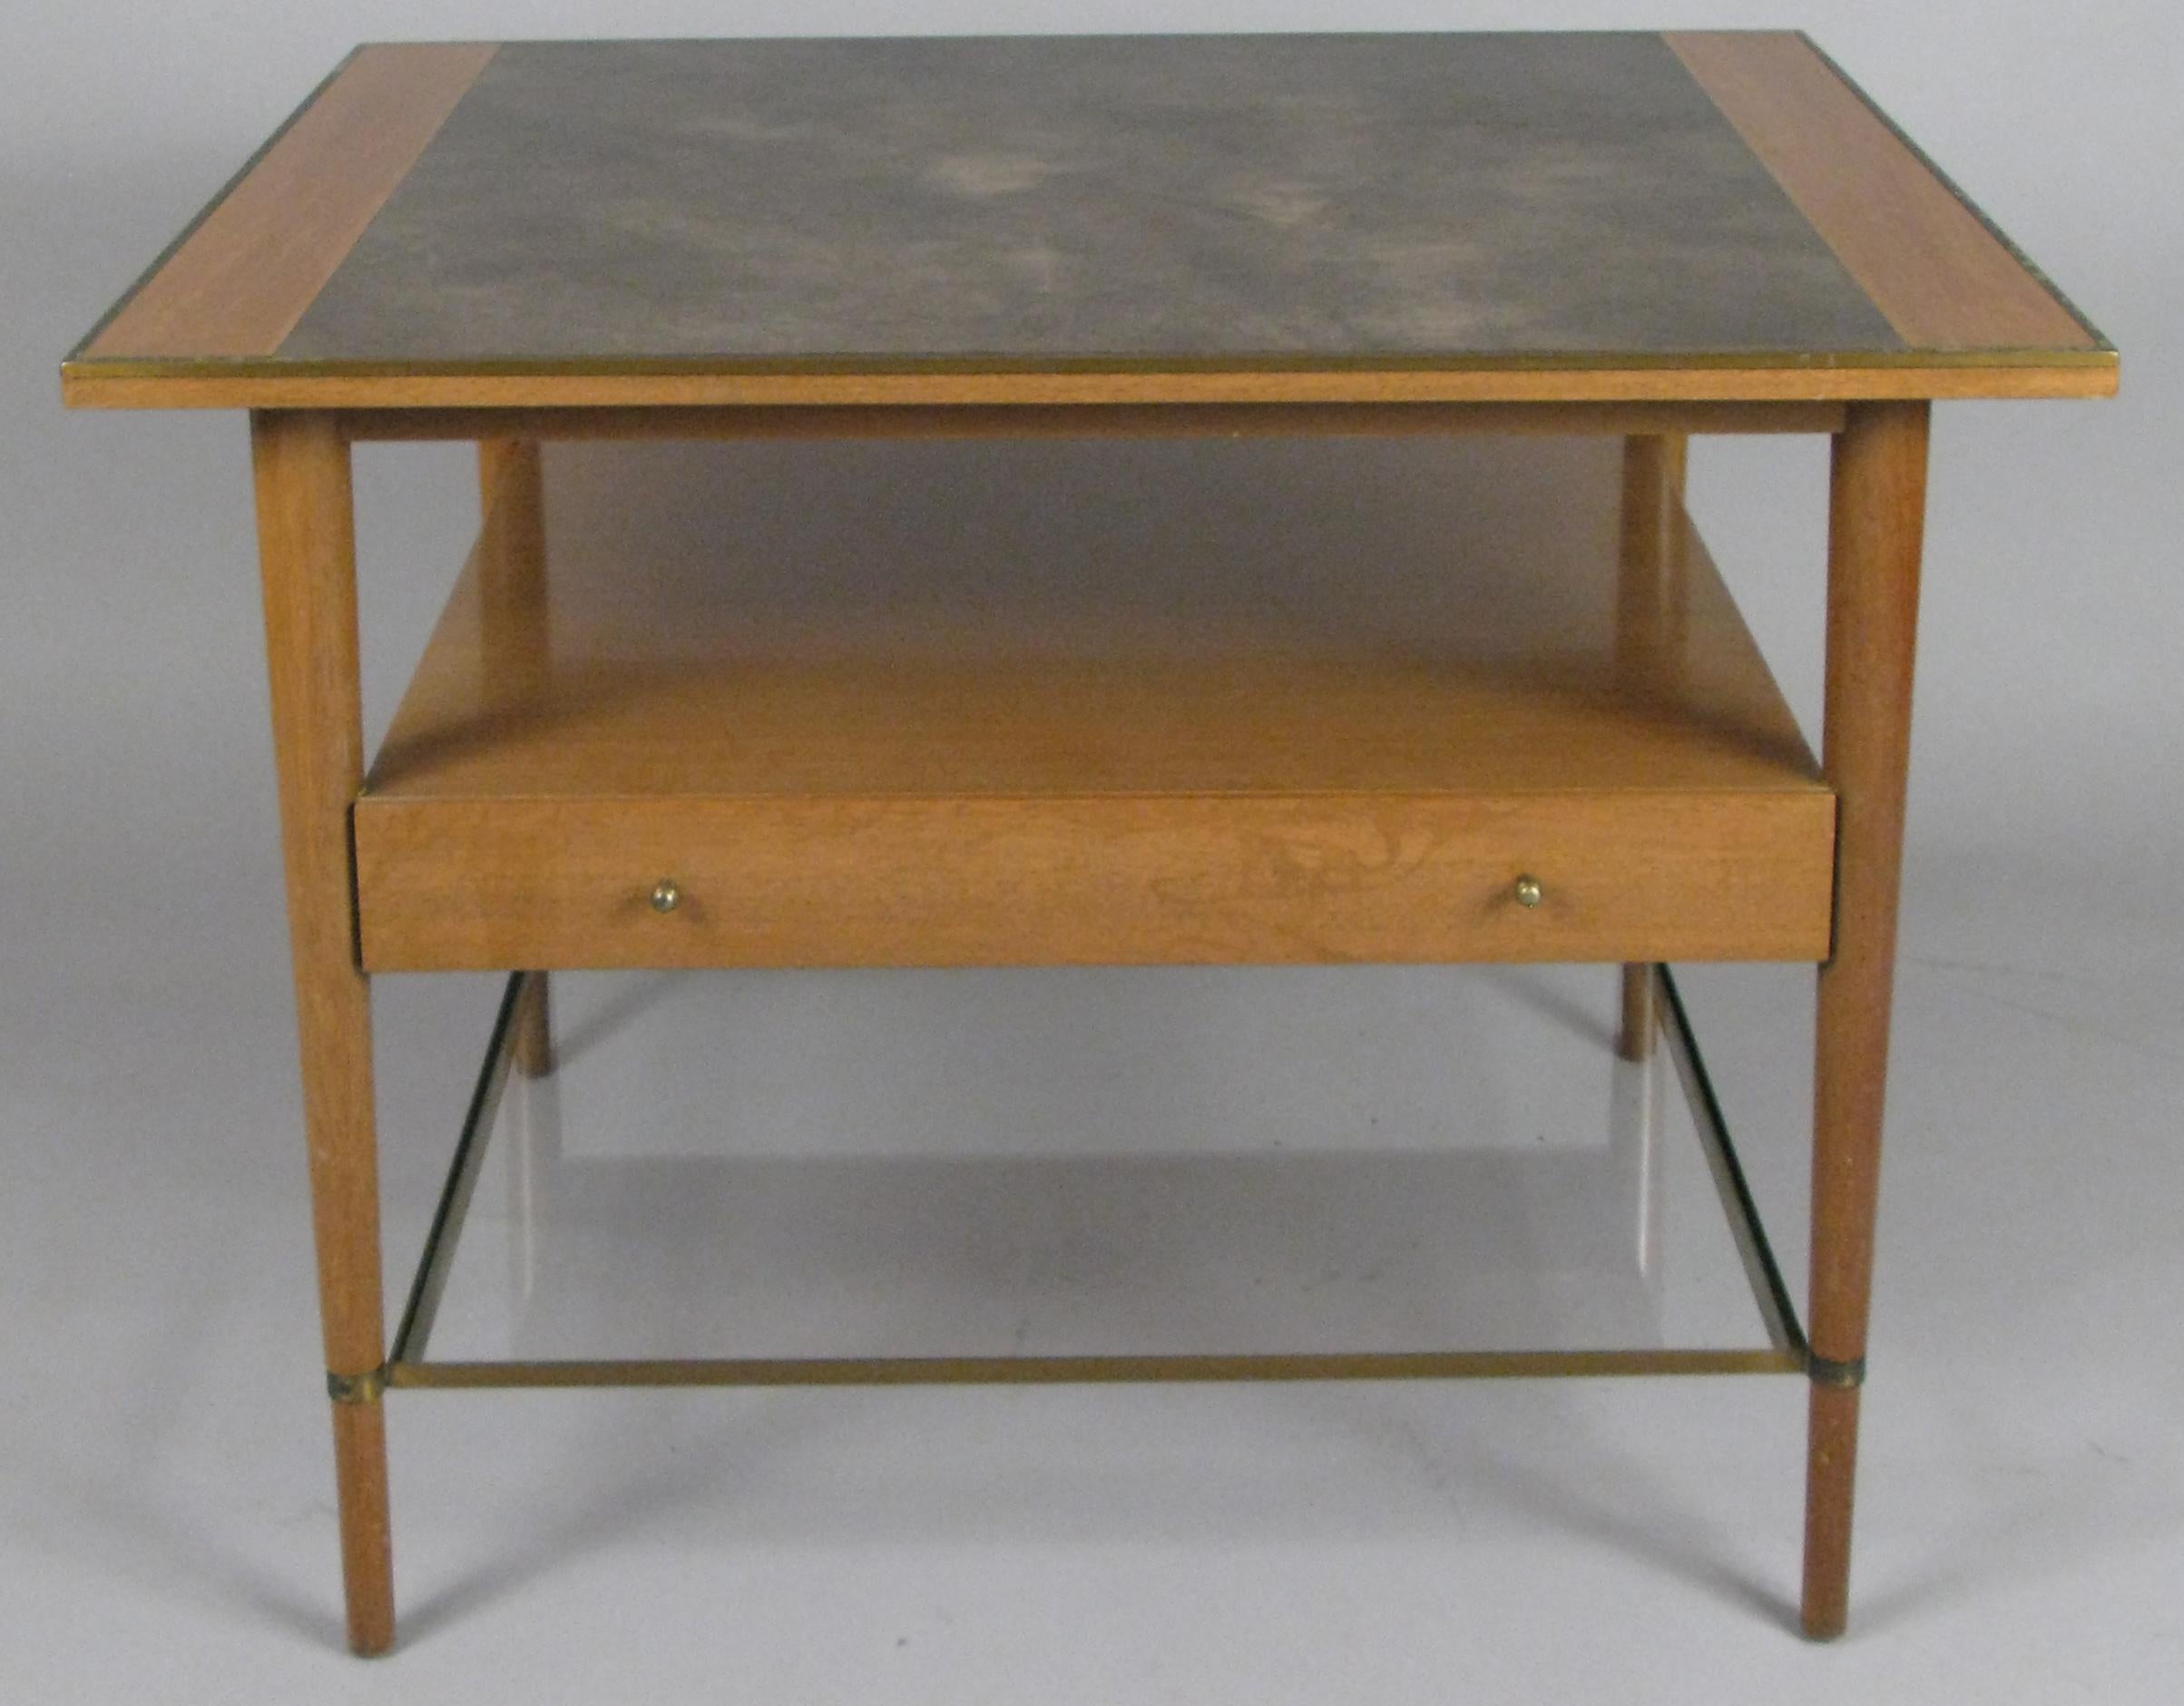 a very handsome vintage 1950s lamp table or nightstand designed by Paul McCobb. Generously scaled with mahogany case, brass trim and stretcher, a leather top, full width drawer, and lower glass shelf. Wonderful design for a variety of uses.